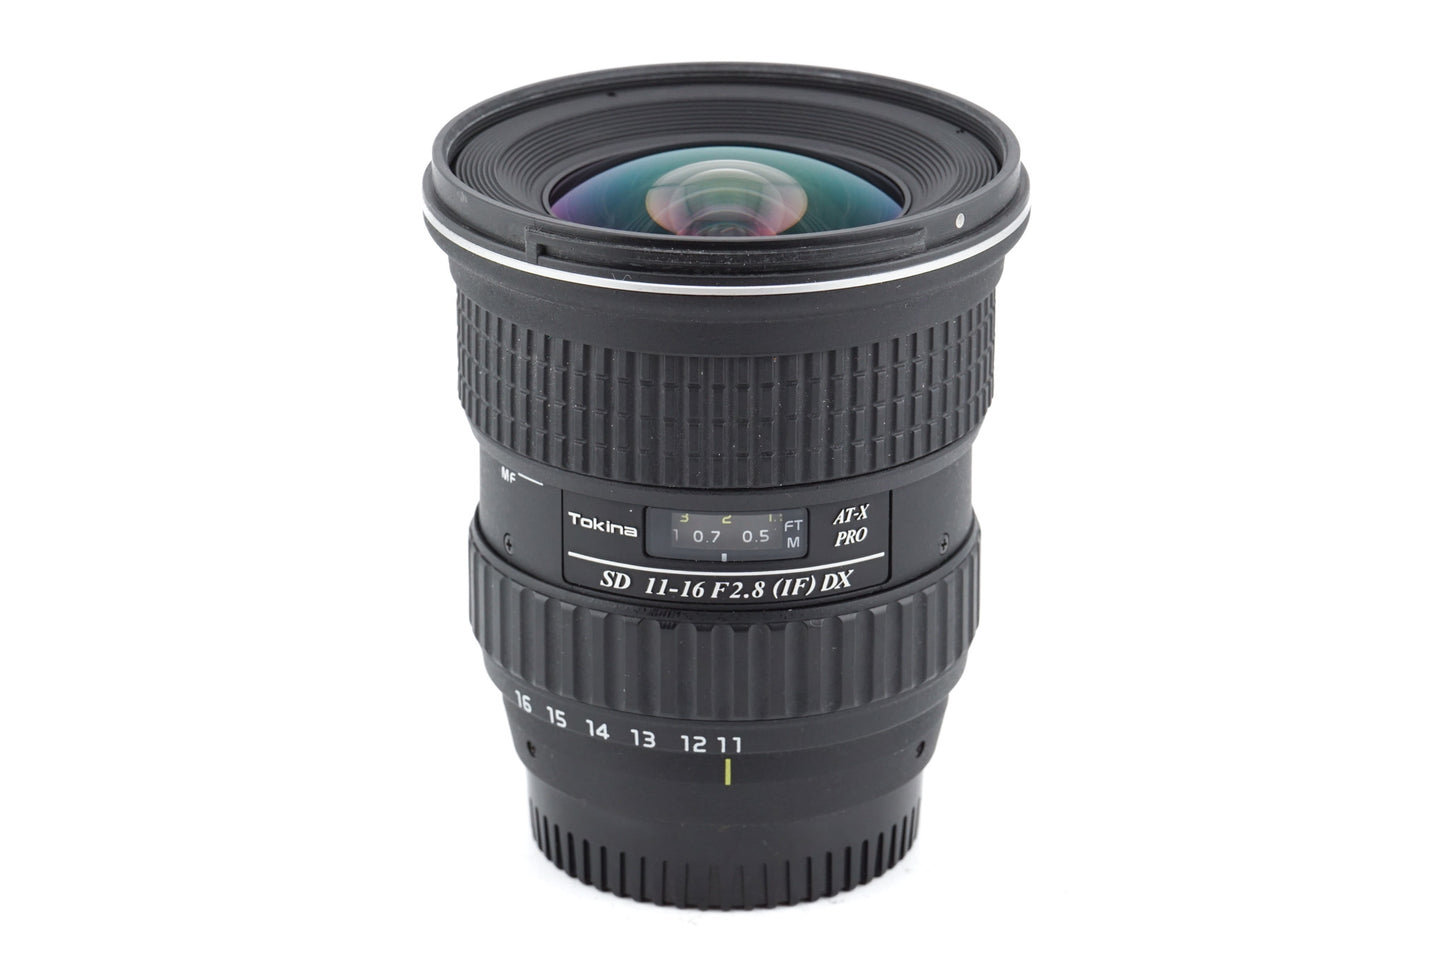 Tokina 11-16mm f2.8 SD AT-X Pro (IF) DX - Lens